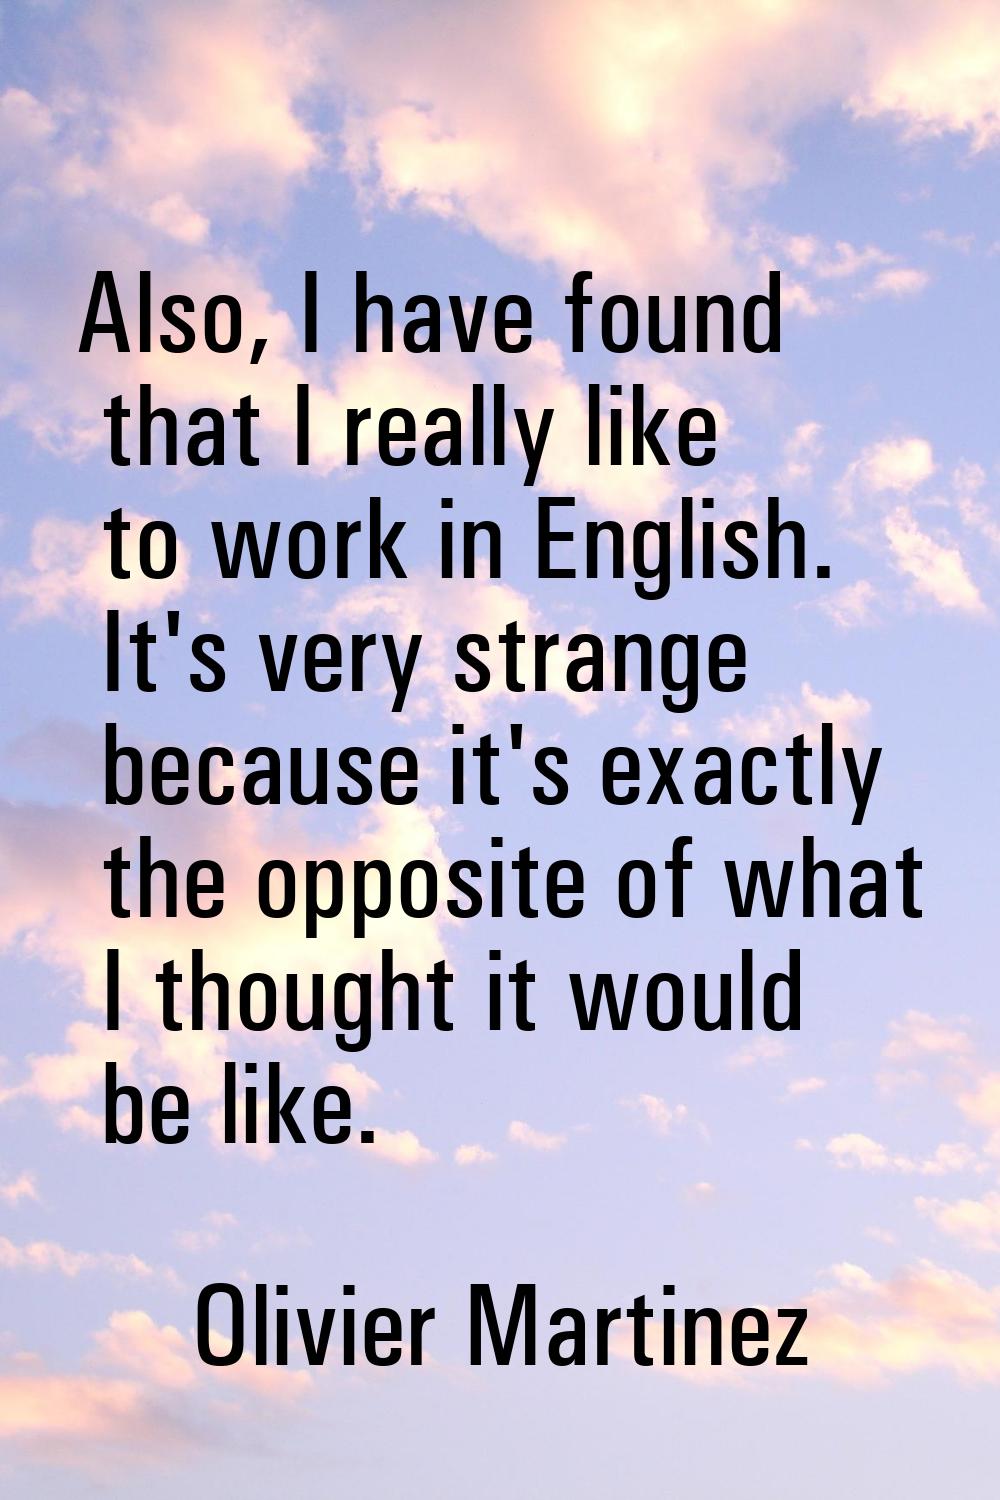 Also, I have found that I really like to work in English. It's very strange because it's exactly th